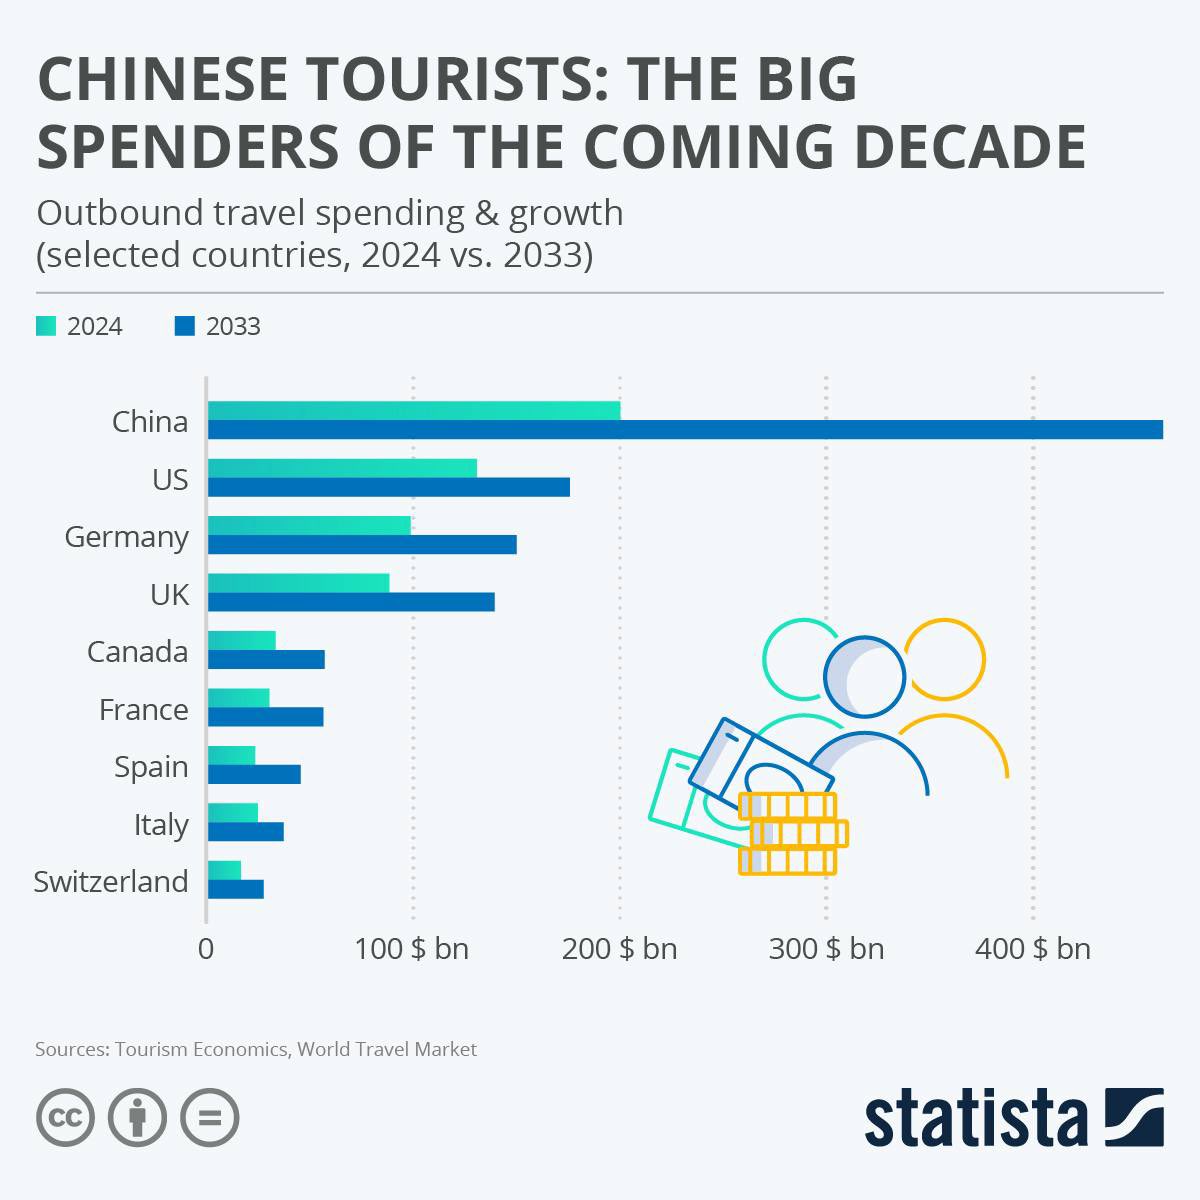 Outbound tourists spending in the coming 10 years.